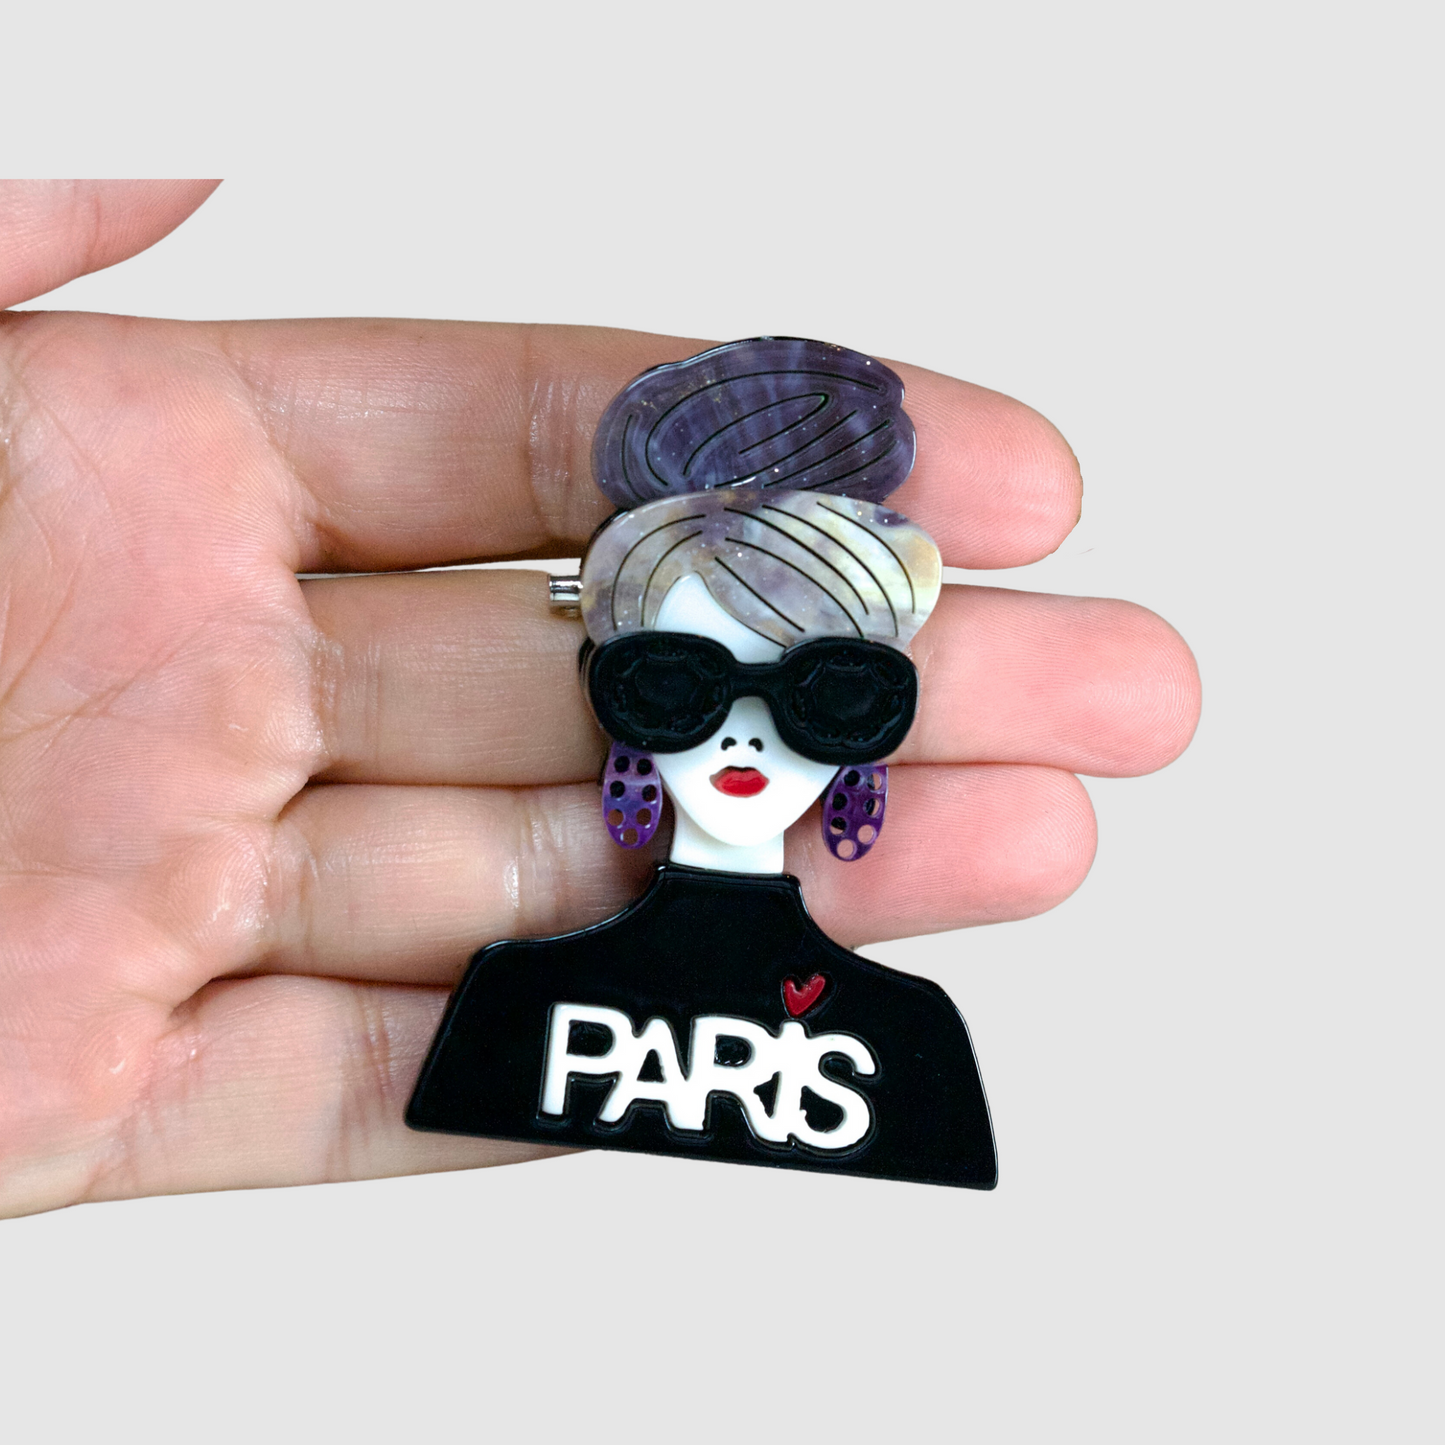 Elegant Modern Lady With Oversized Sunglasses Pin Brooch